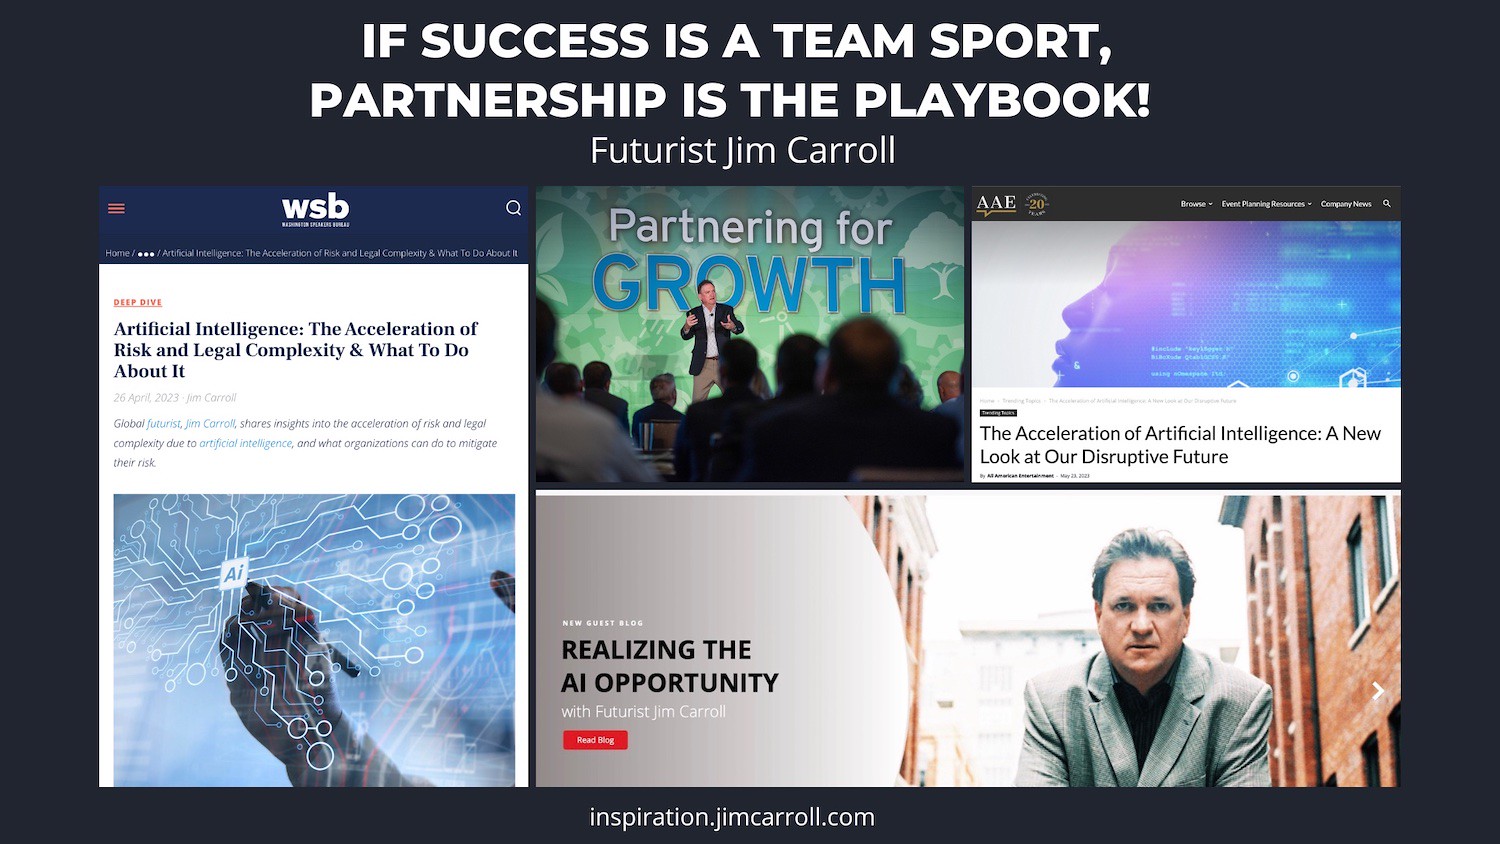 Daily Inspiration: "If success is a team sport, partnership is the playbook!" - Futurist Jim Carroll